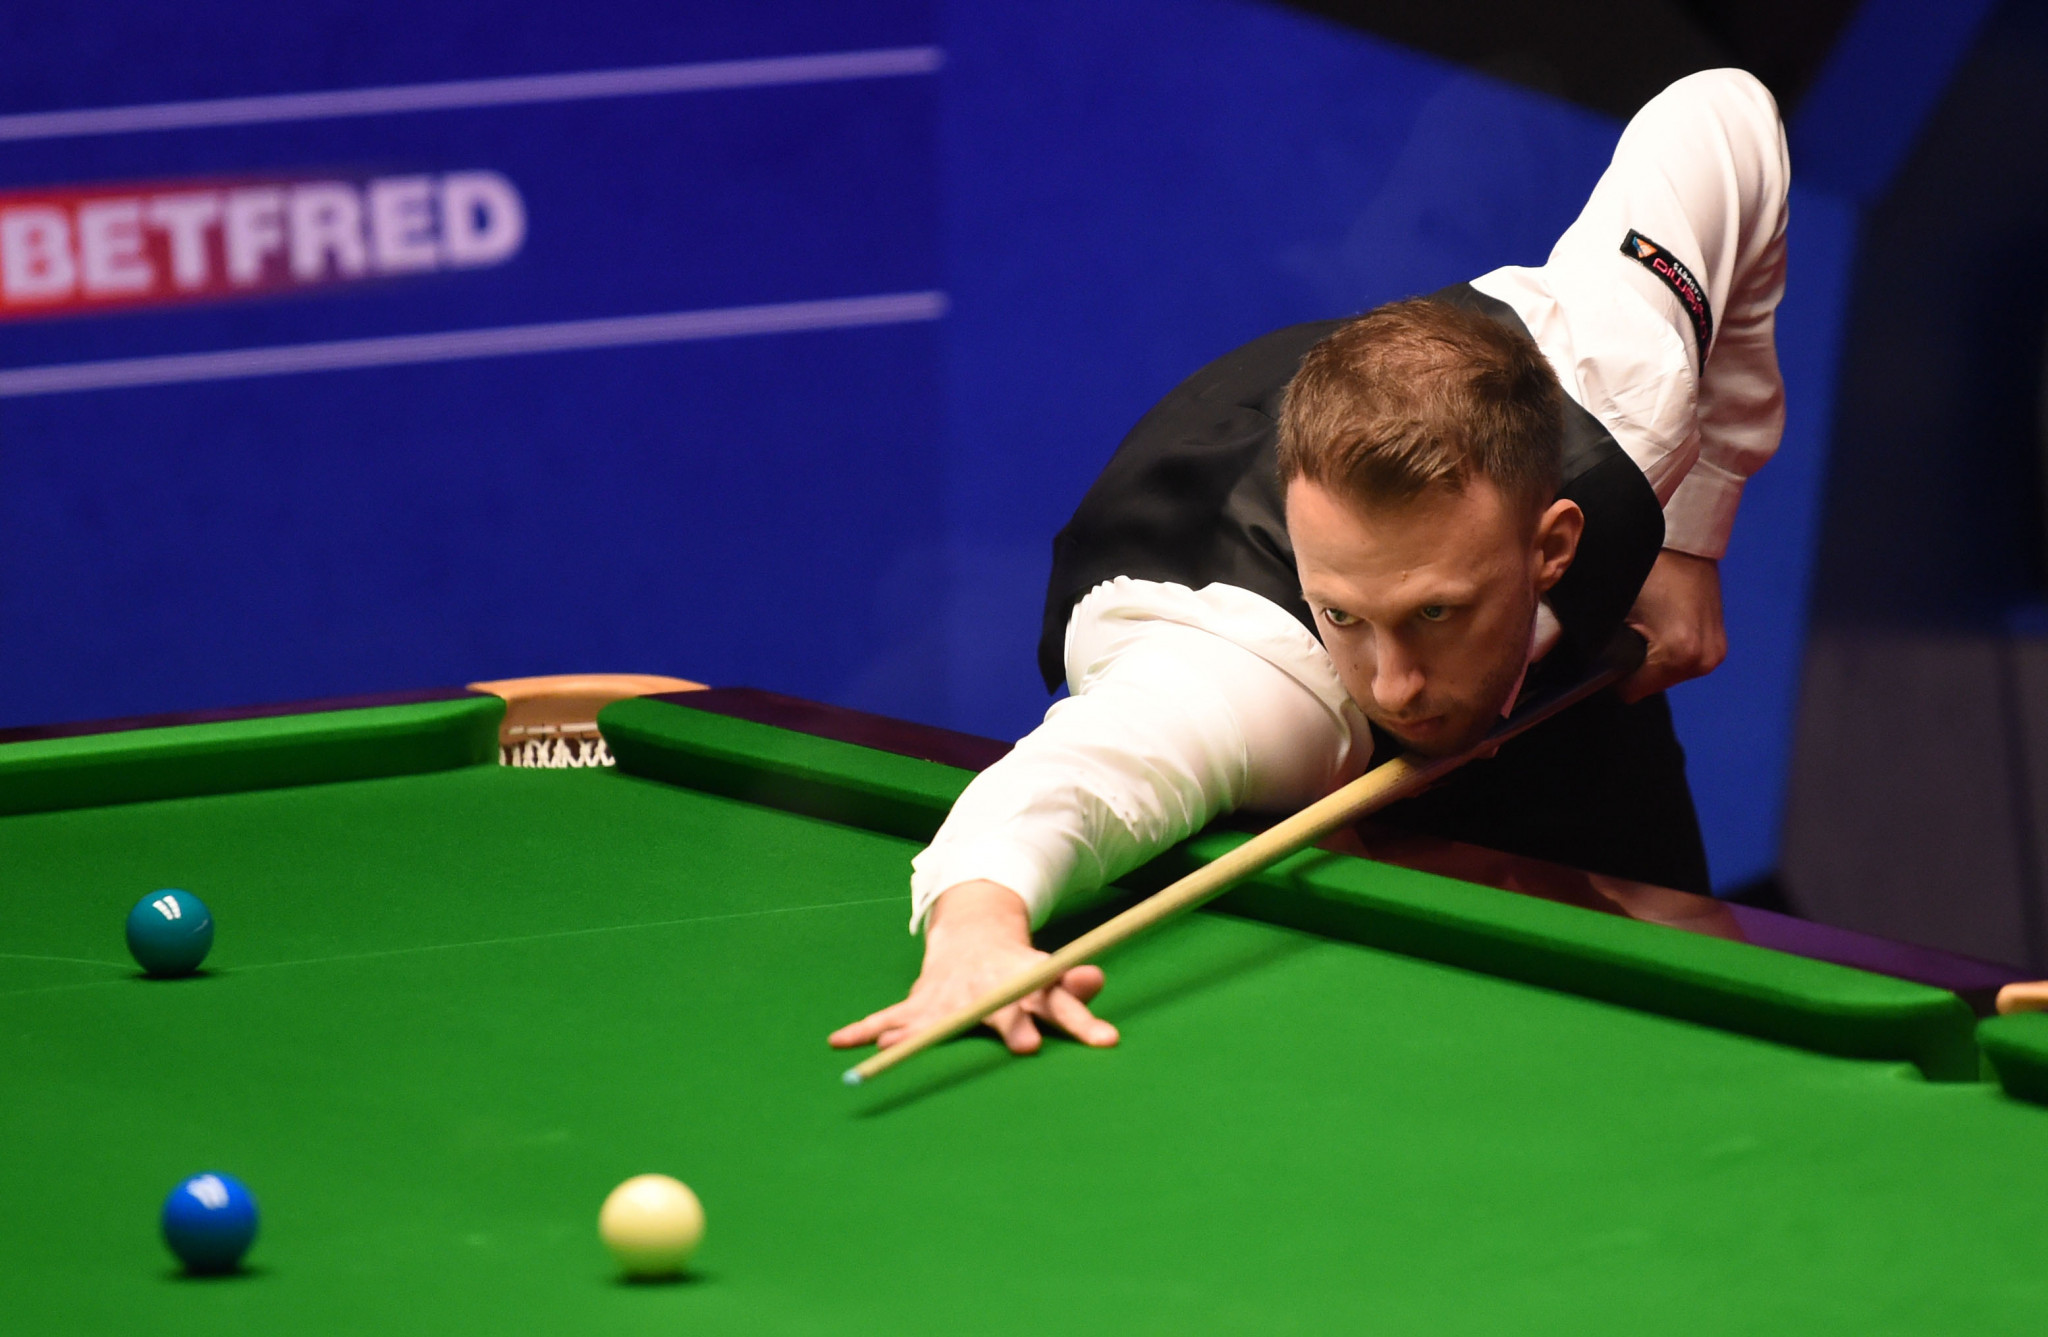 Former champions Williams, Selby and Trump reach World Snooker Championship quarter-finals